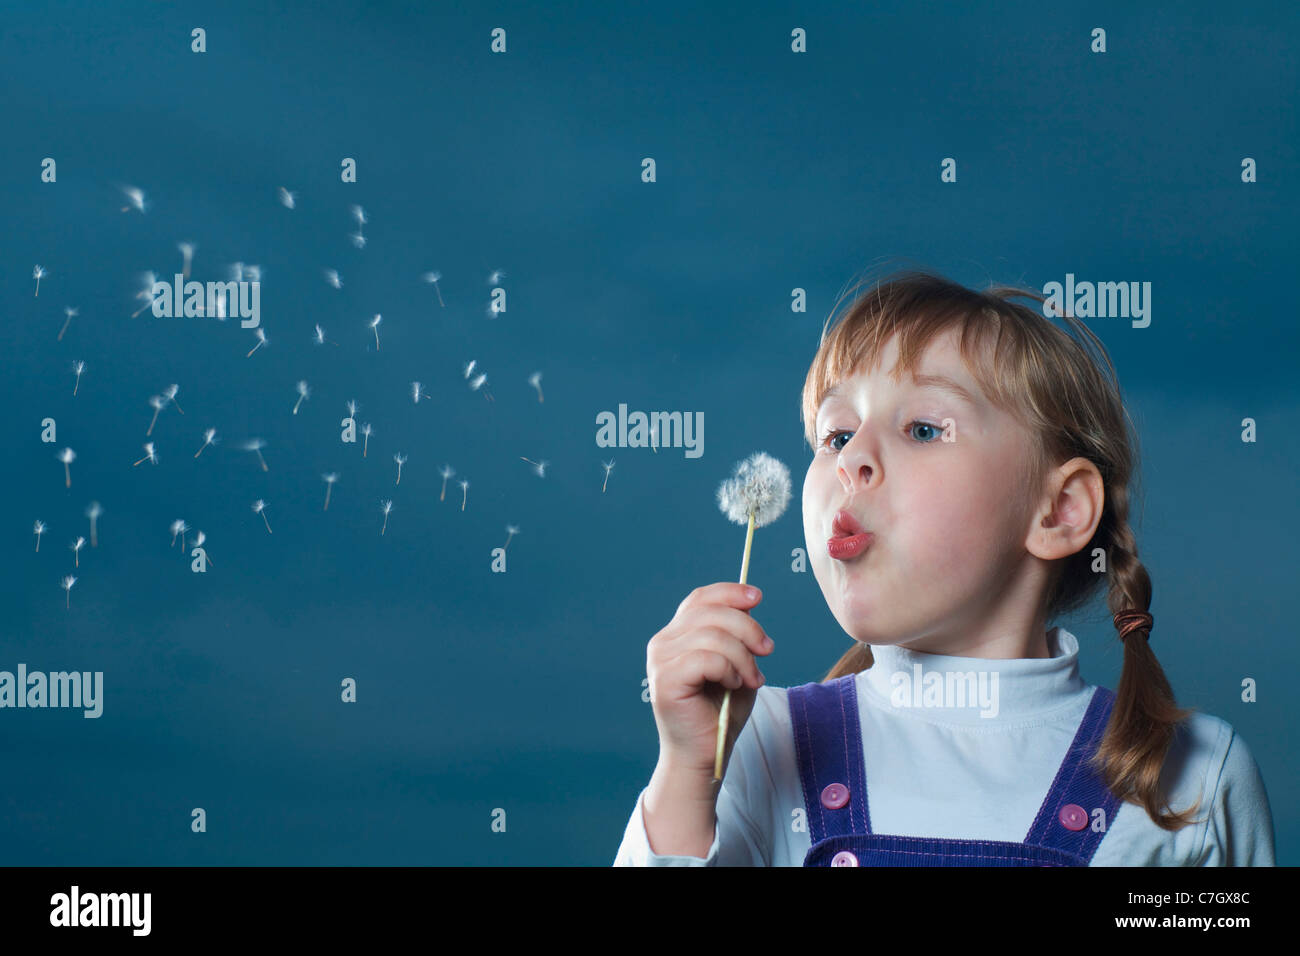 A girl blowing on a dandelion Stock Photo